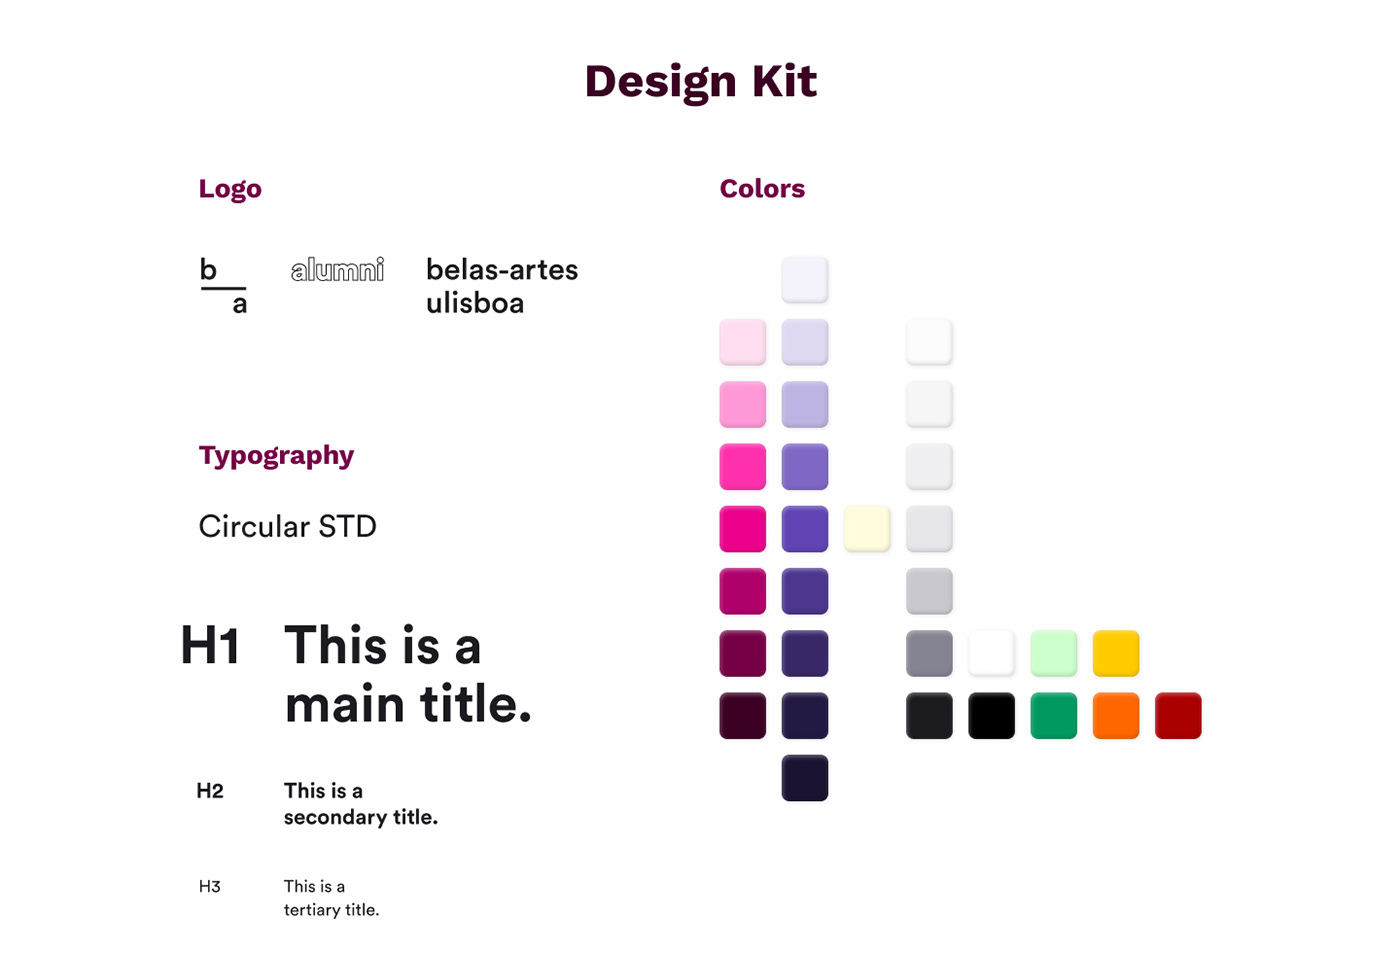 Design kit with colors, typography, branding and buttons.